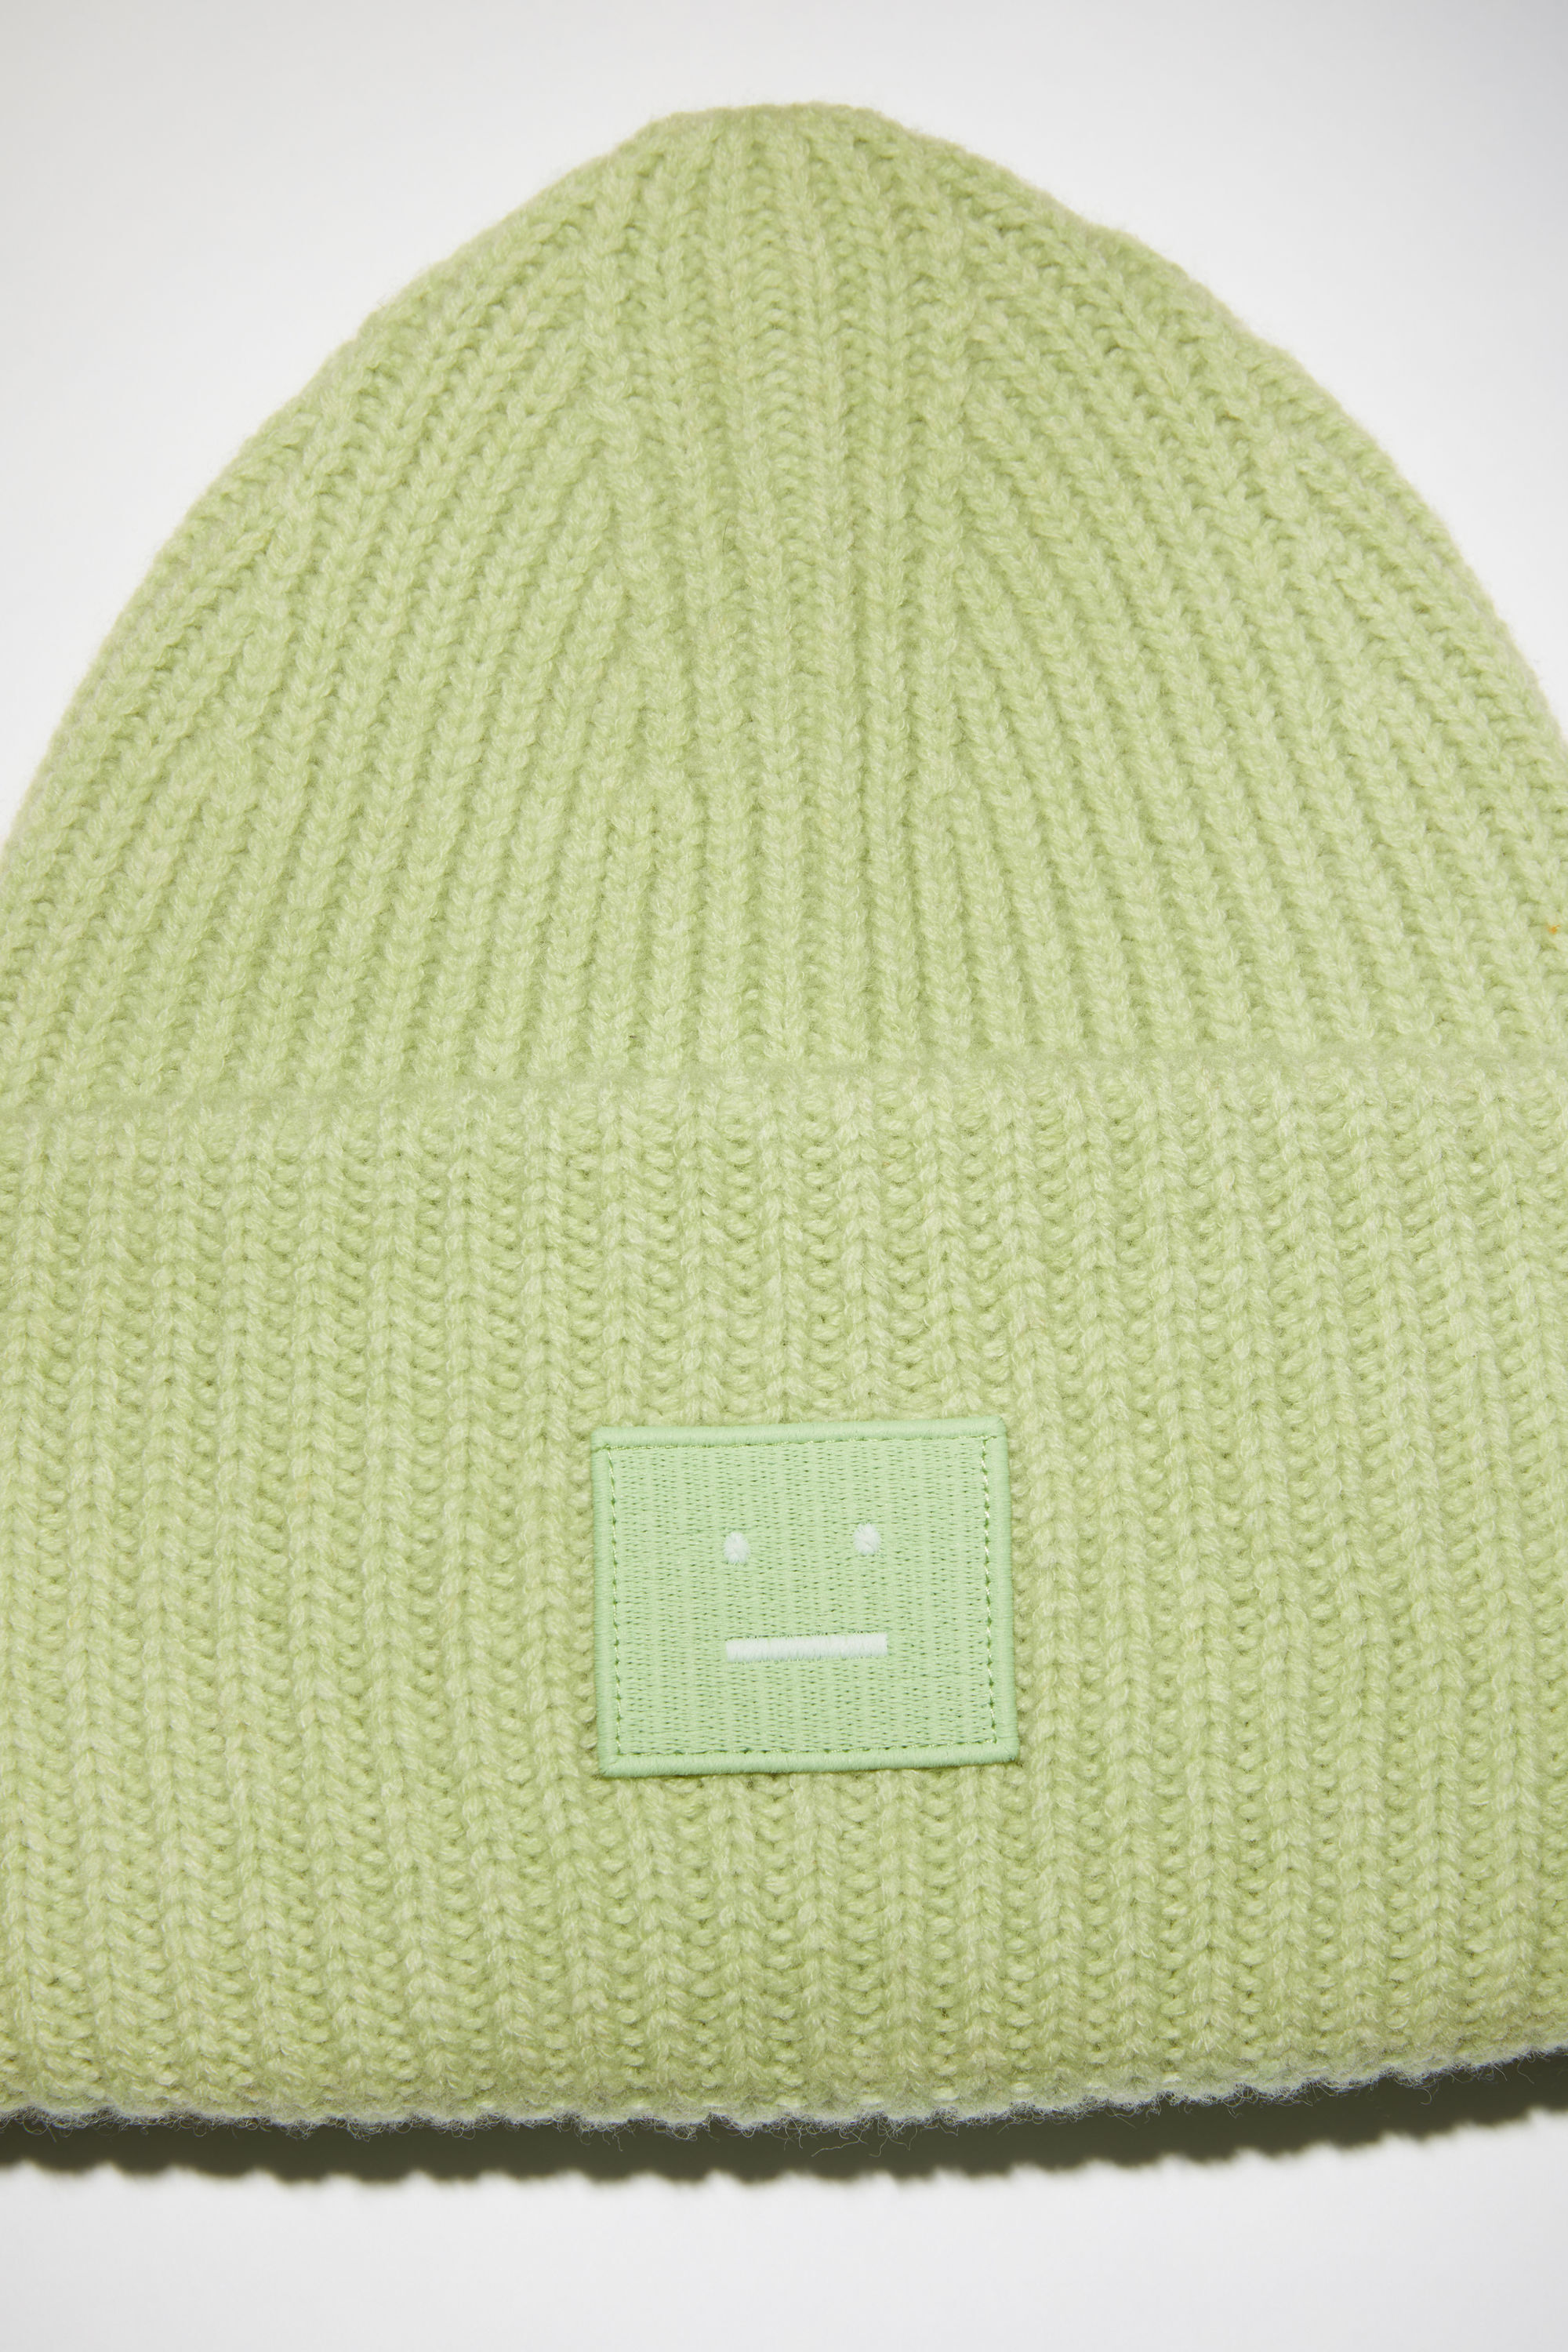 Womens Mens Accessories Mens Hats Acne Studios Wool Pansy N Face Beanie Hat in Khaki Green 